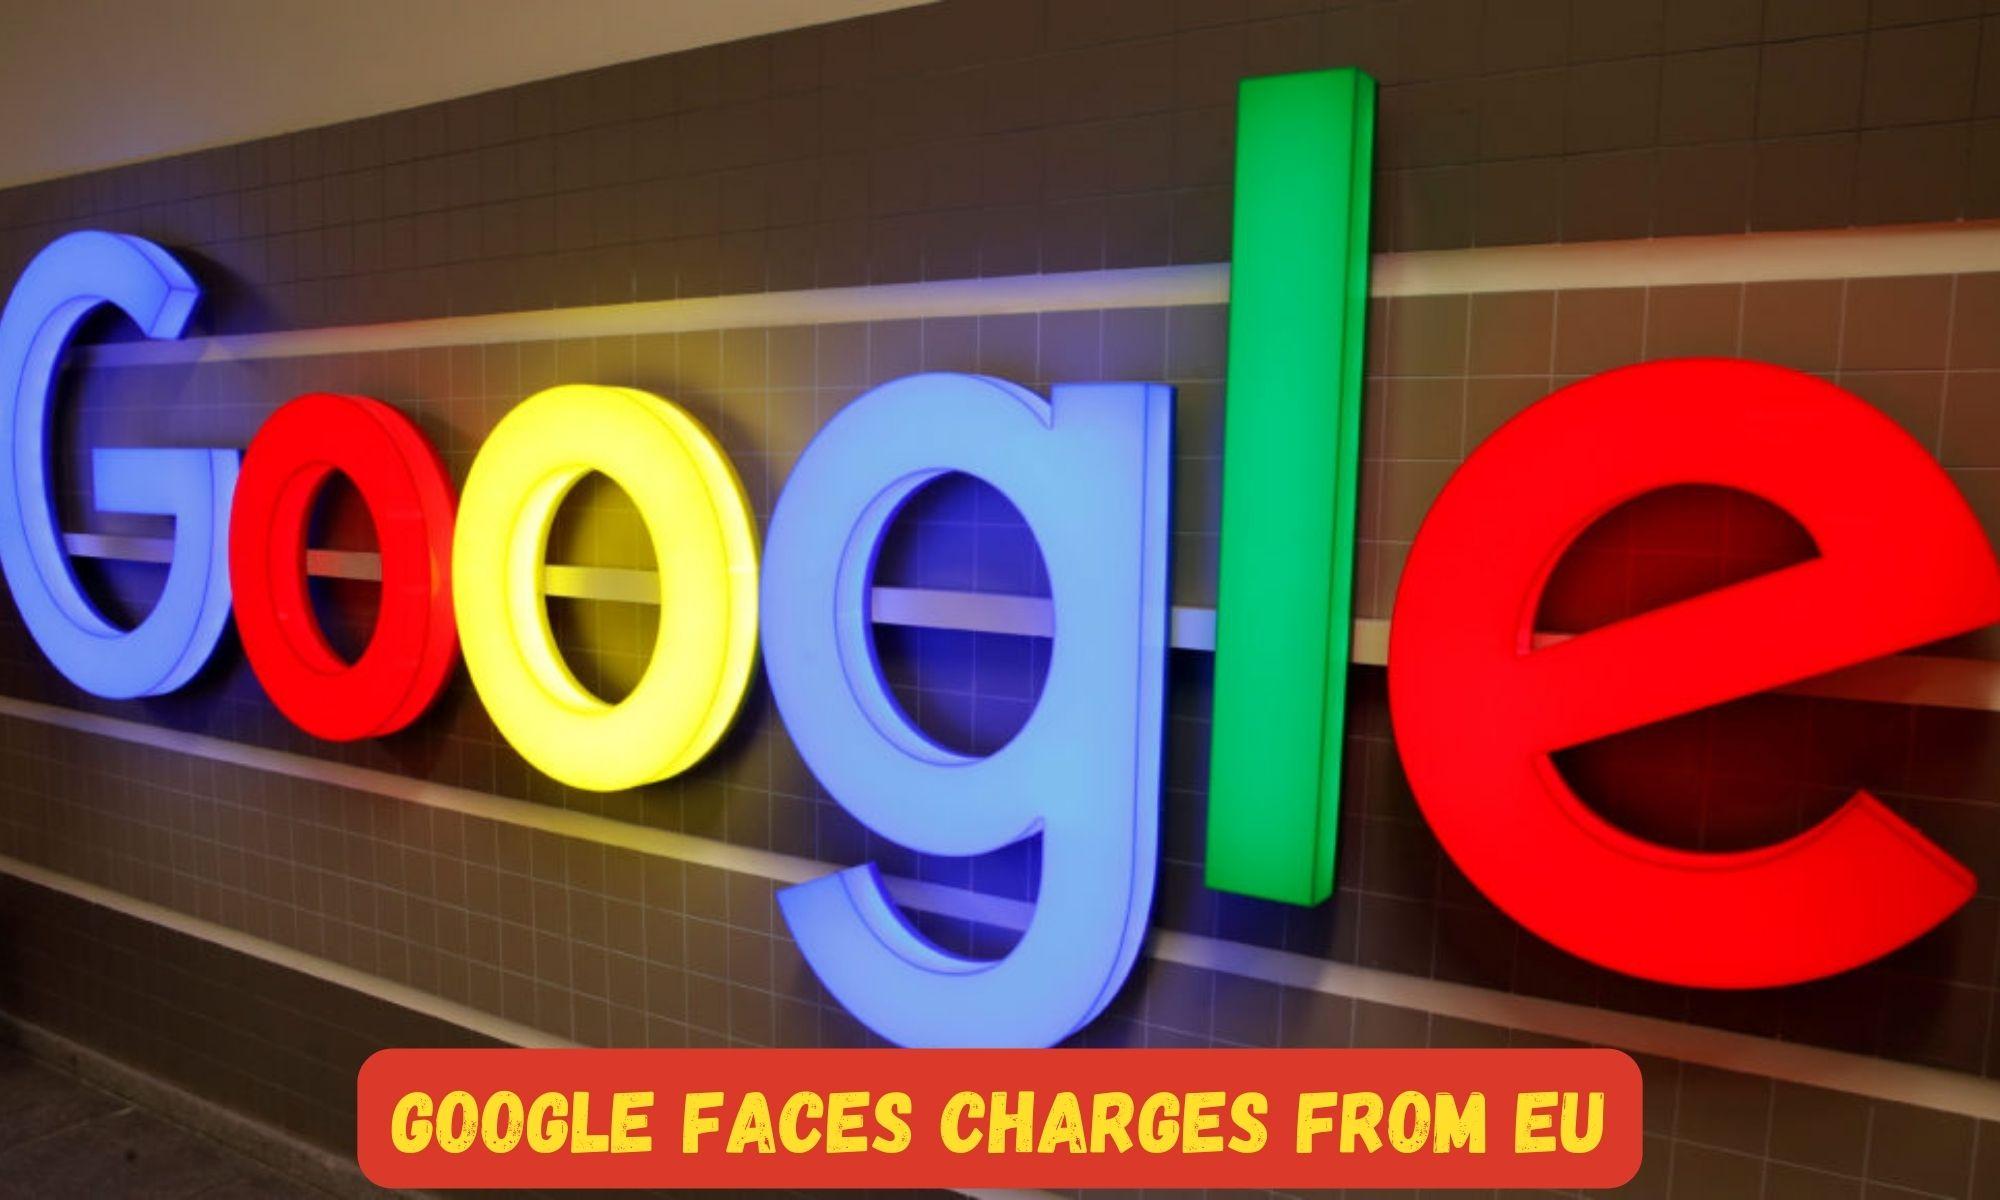 Google faces charges from EU